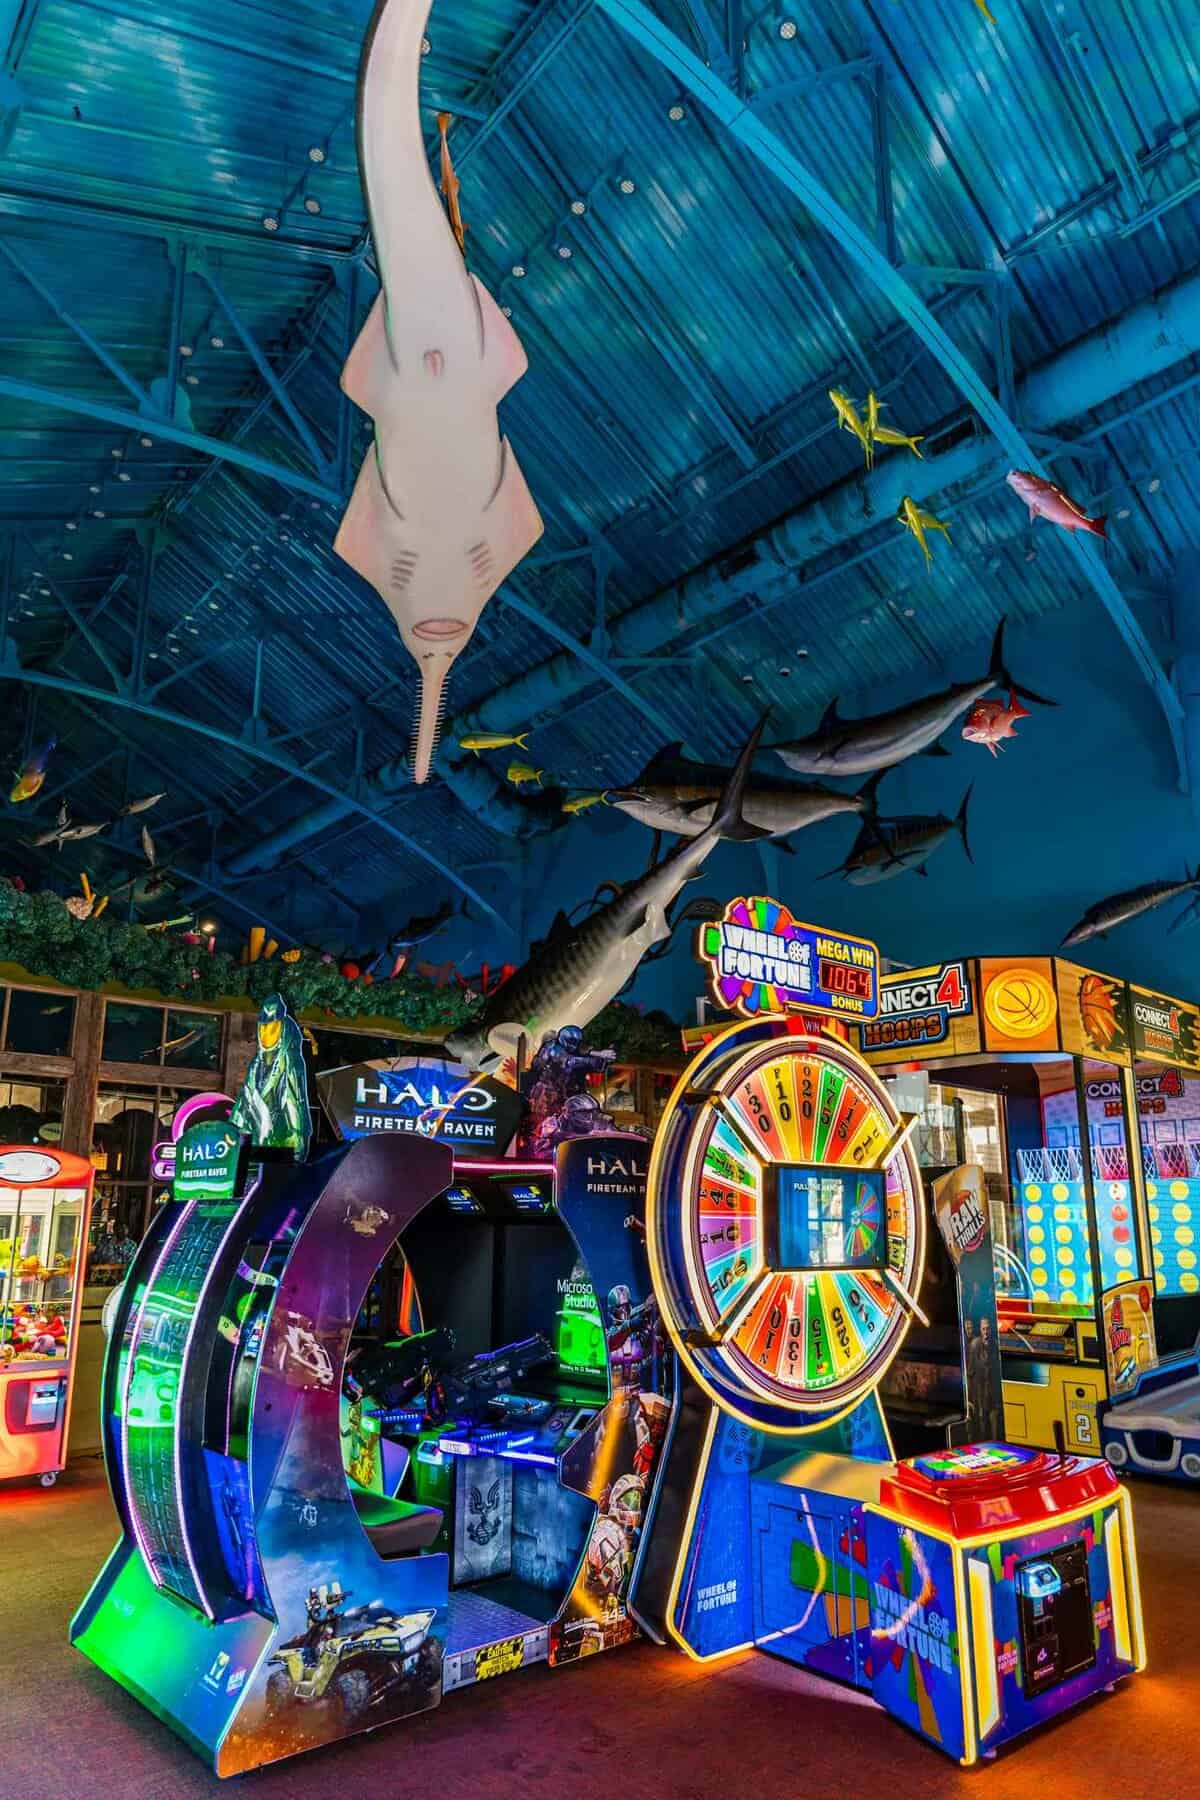 Arcade with hanging sea creatures statues